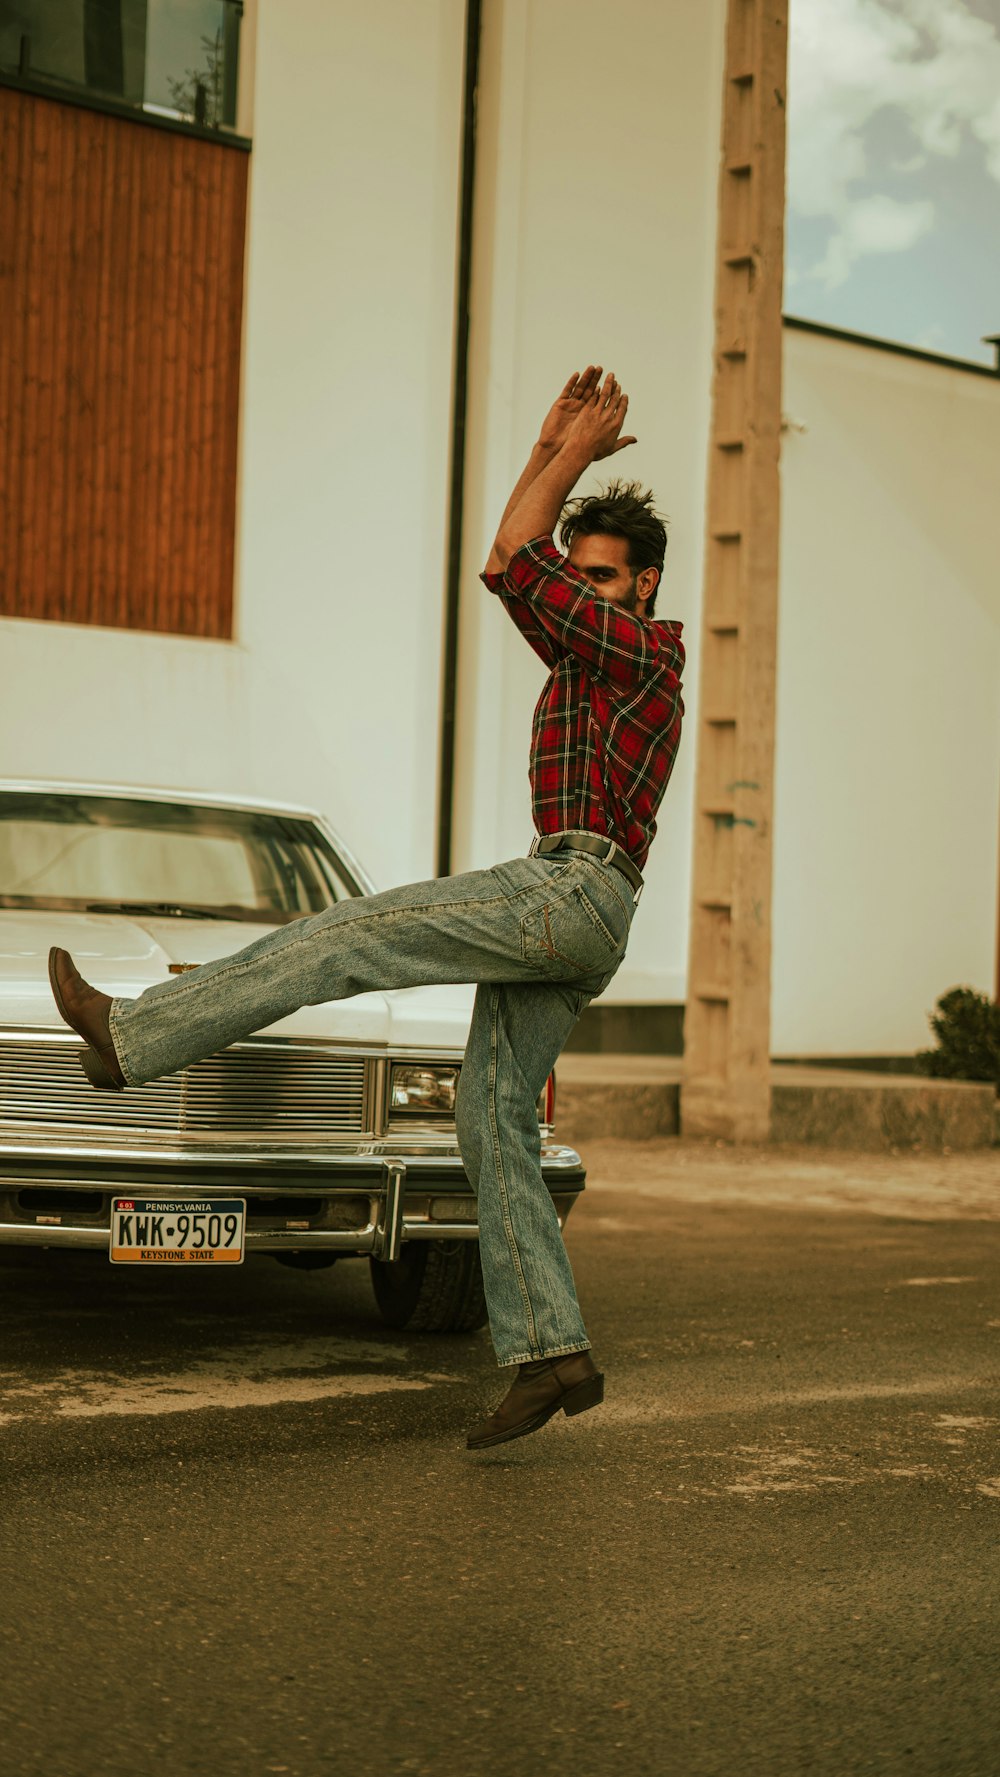 a man in plaid shirt and jeans doing a trick on a skateboard